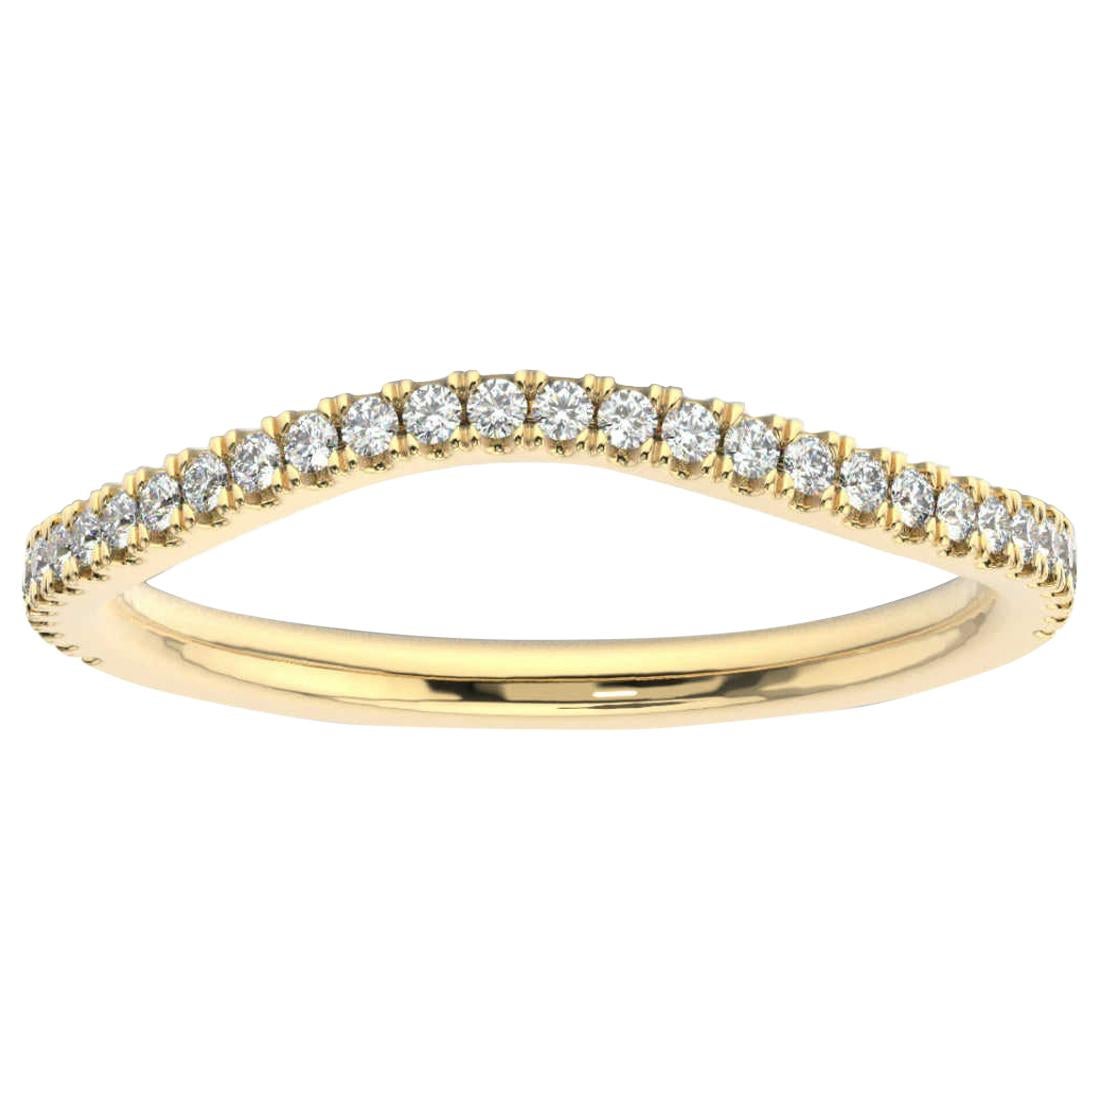 14K Yellow Gold Frances Petite Curve Diamond Ring '1/5 Ct. Tw' For Sale